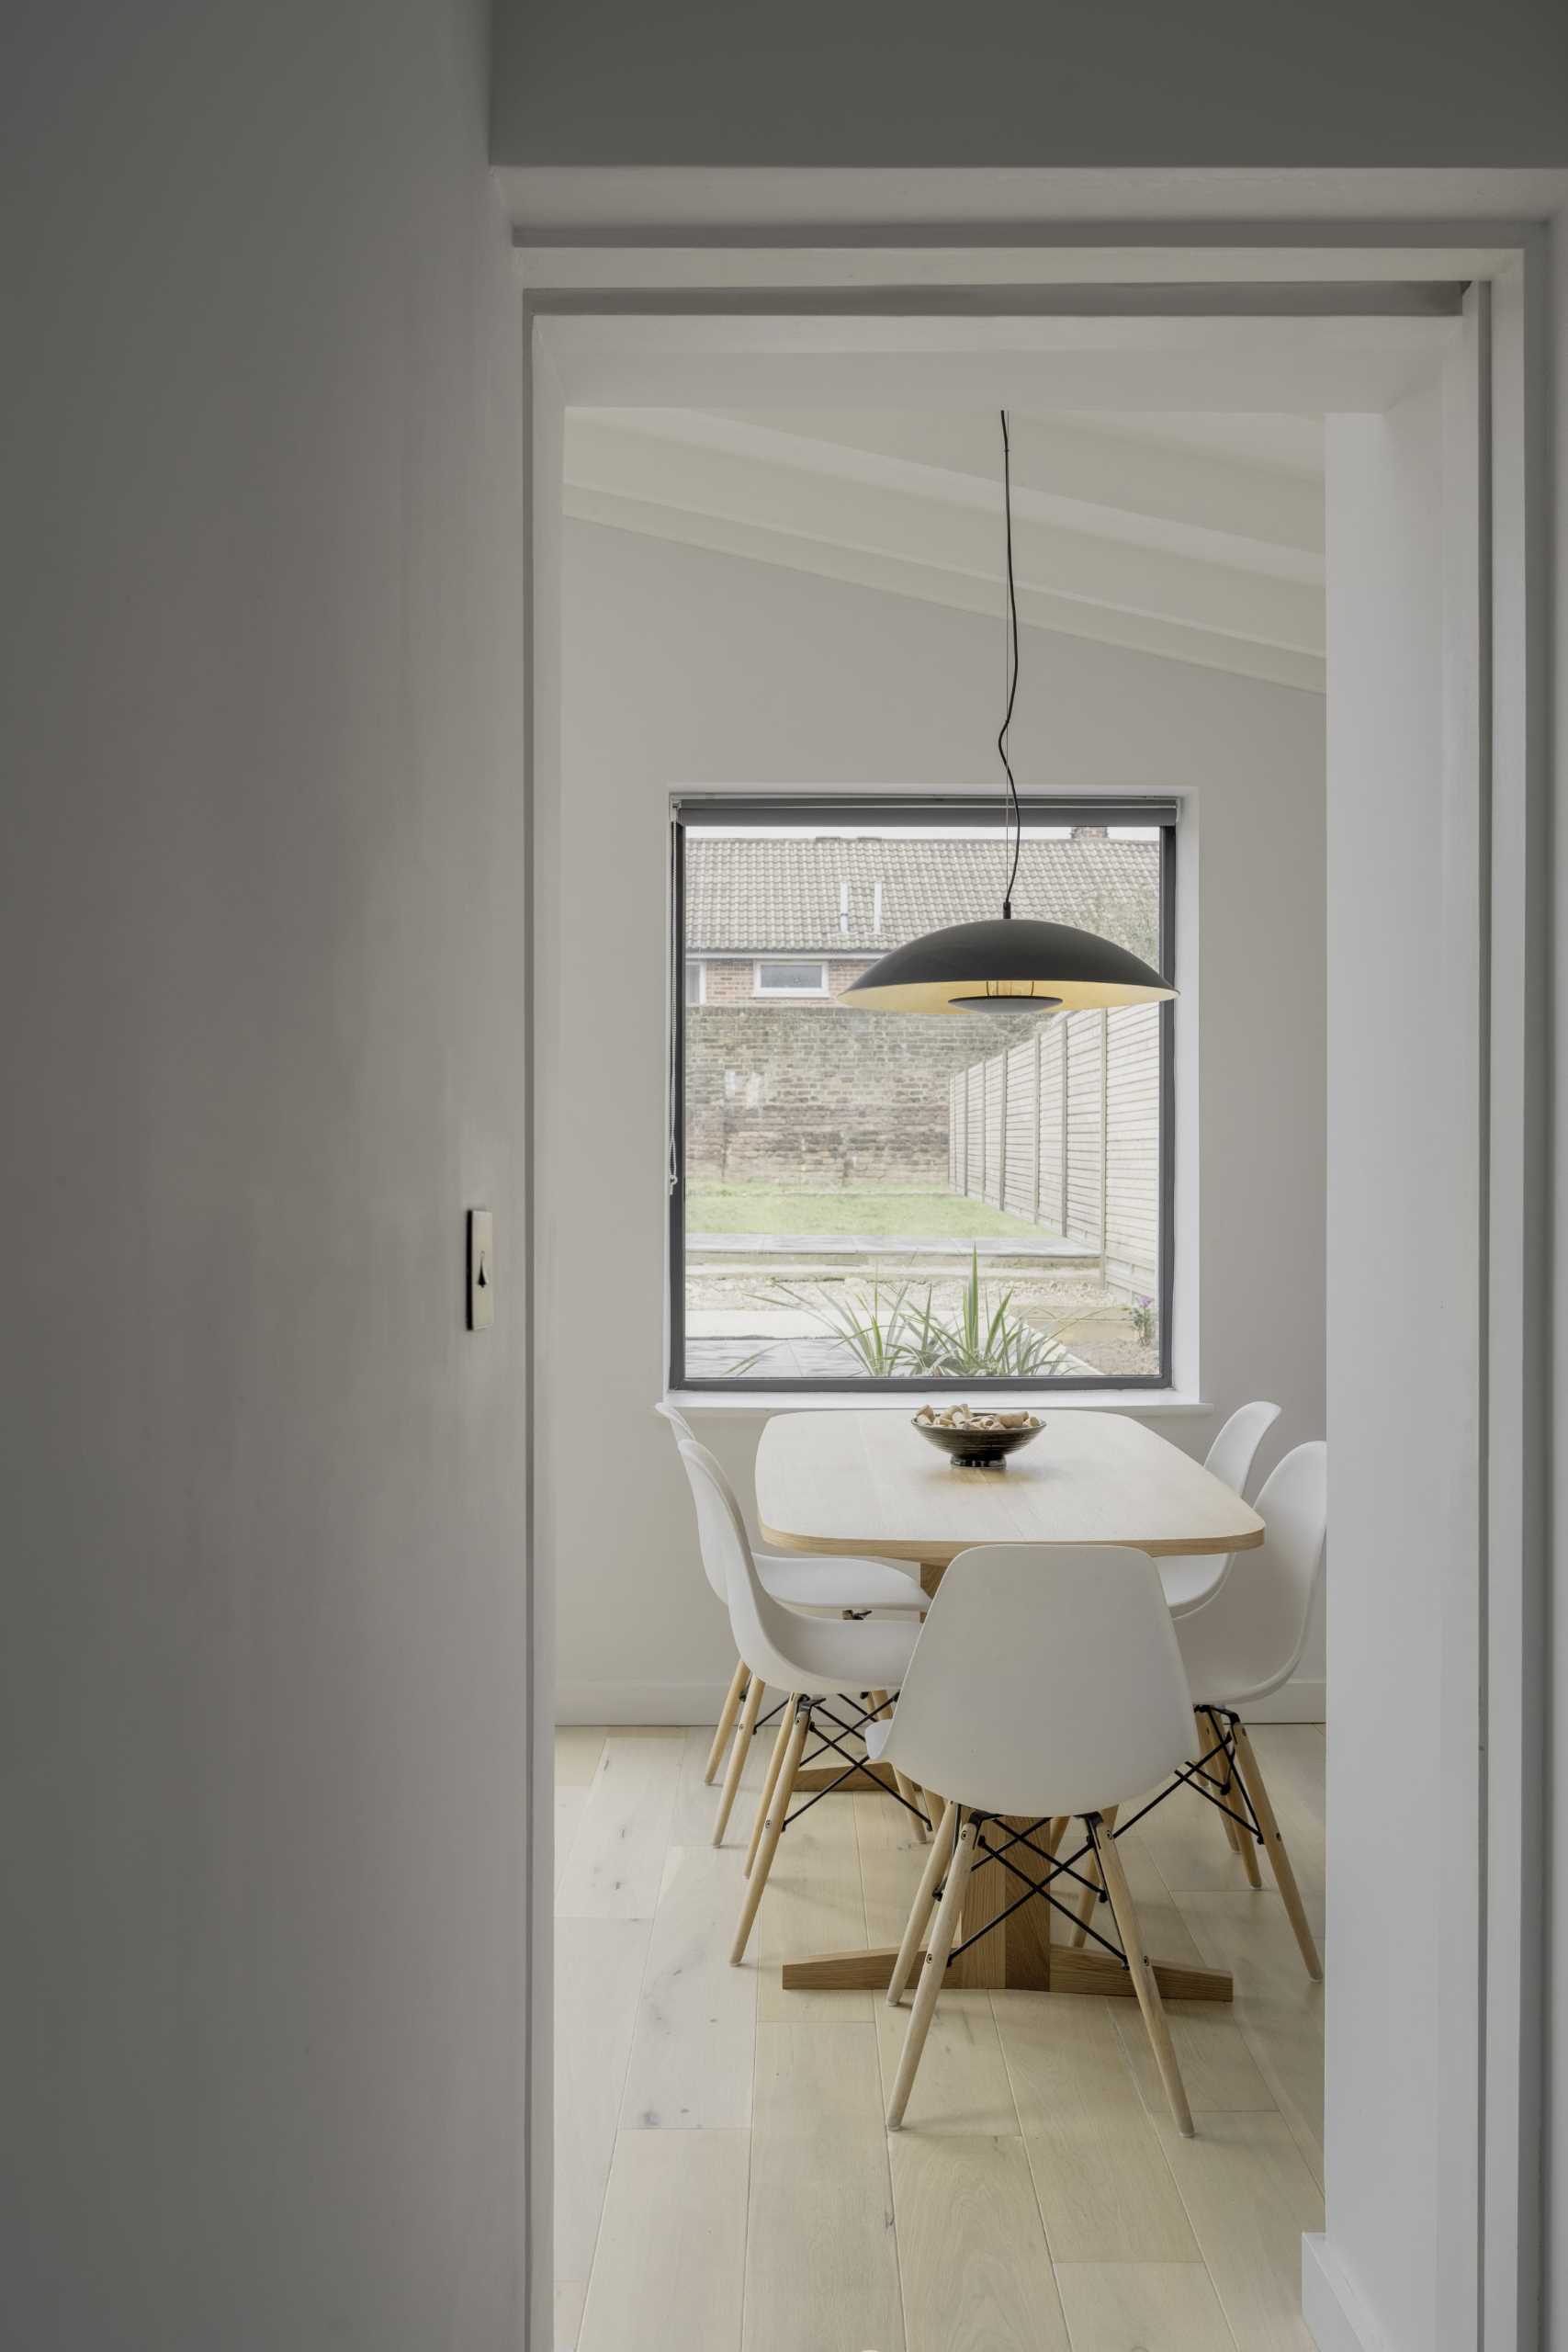 A small dining area with a wood table and a black pendant light above.